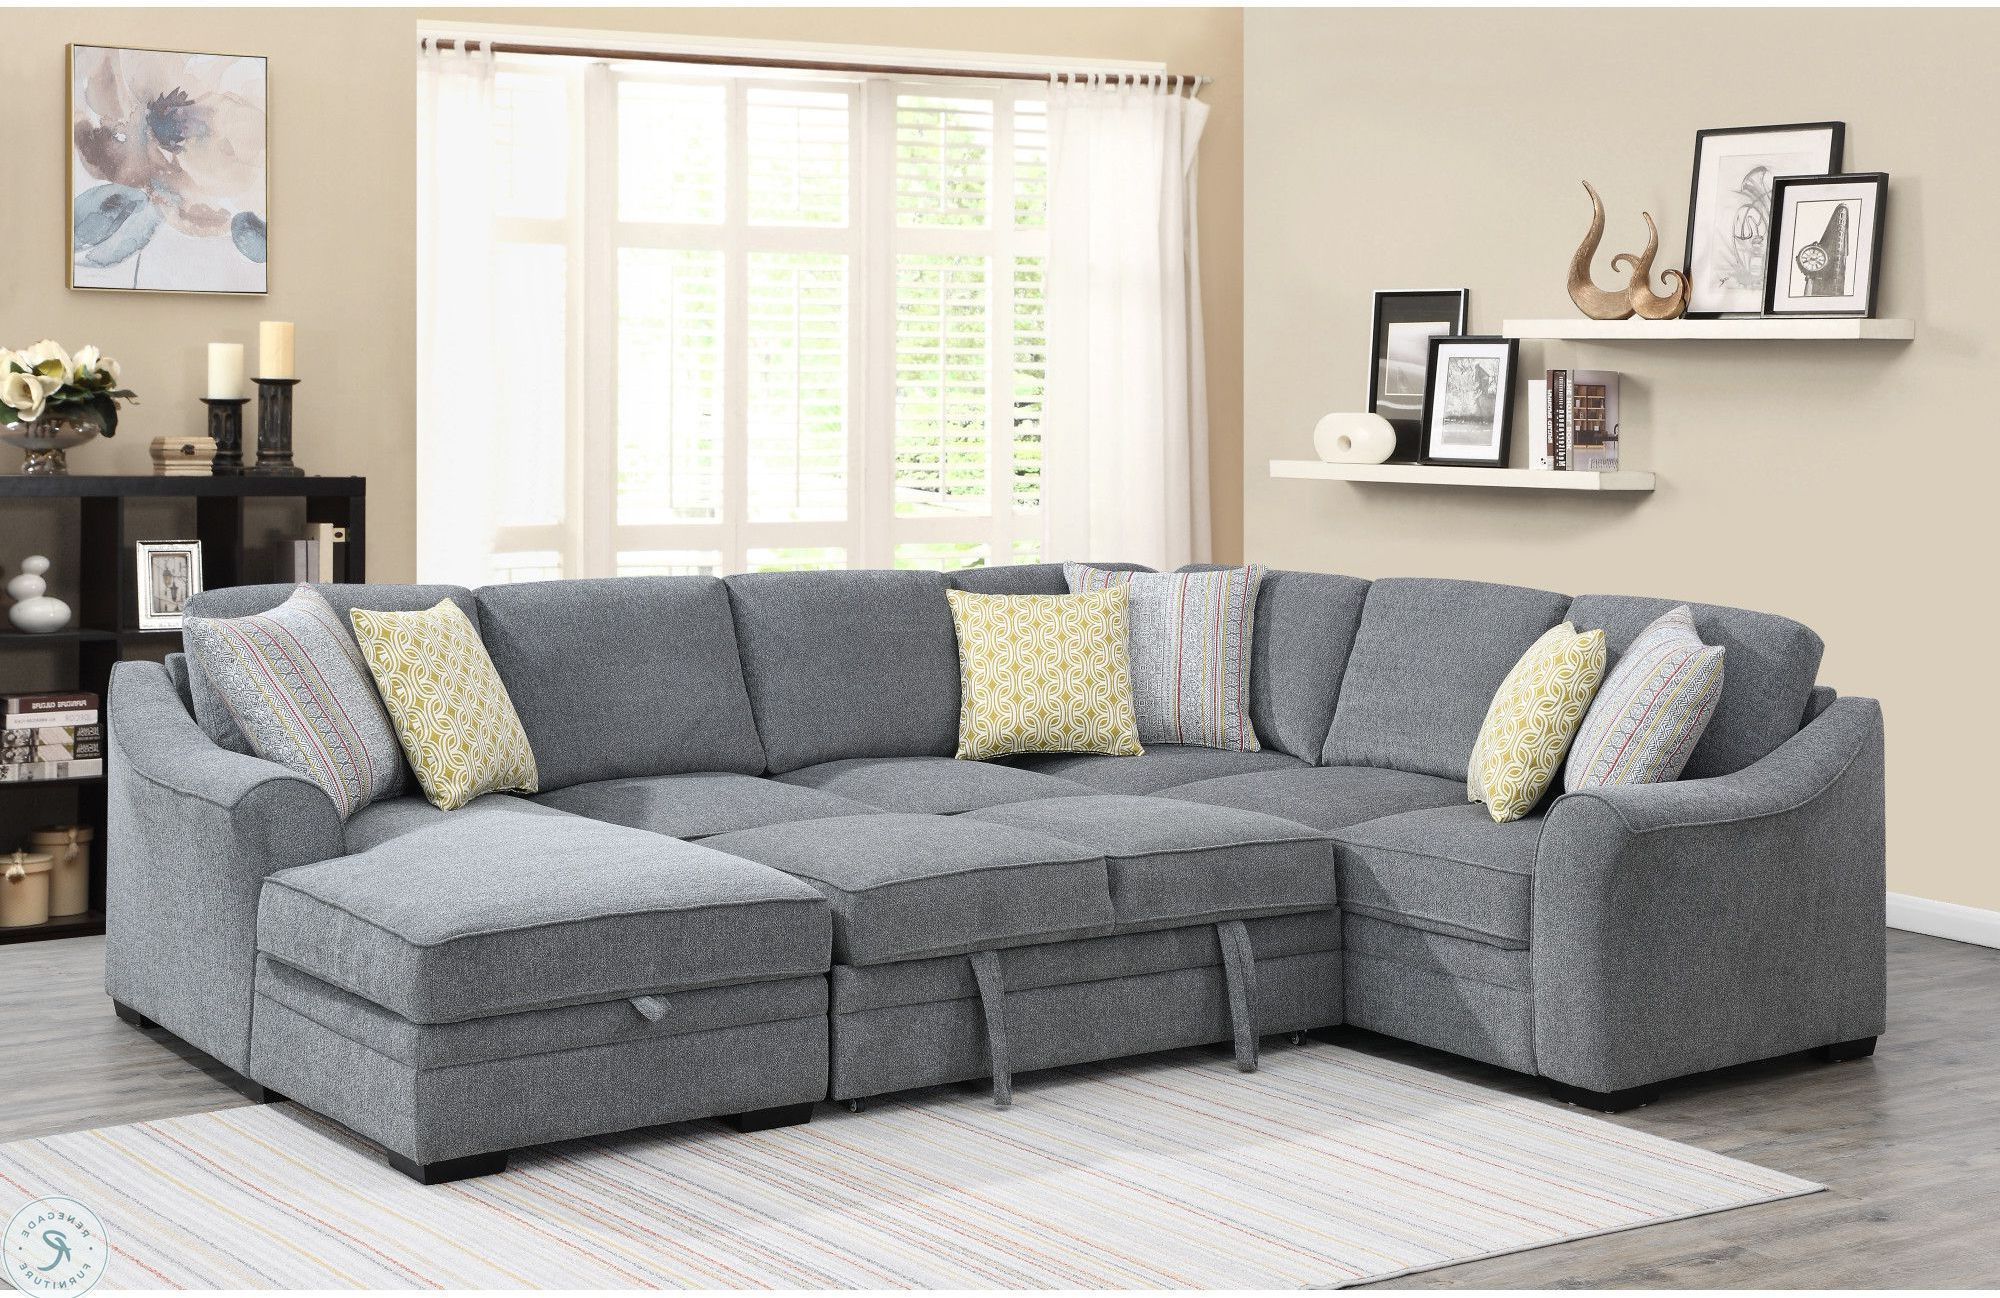 Sectional Sleeper Sofa, Furniture (View 2 of 15)